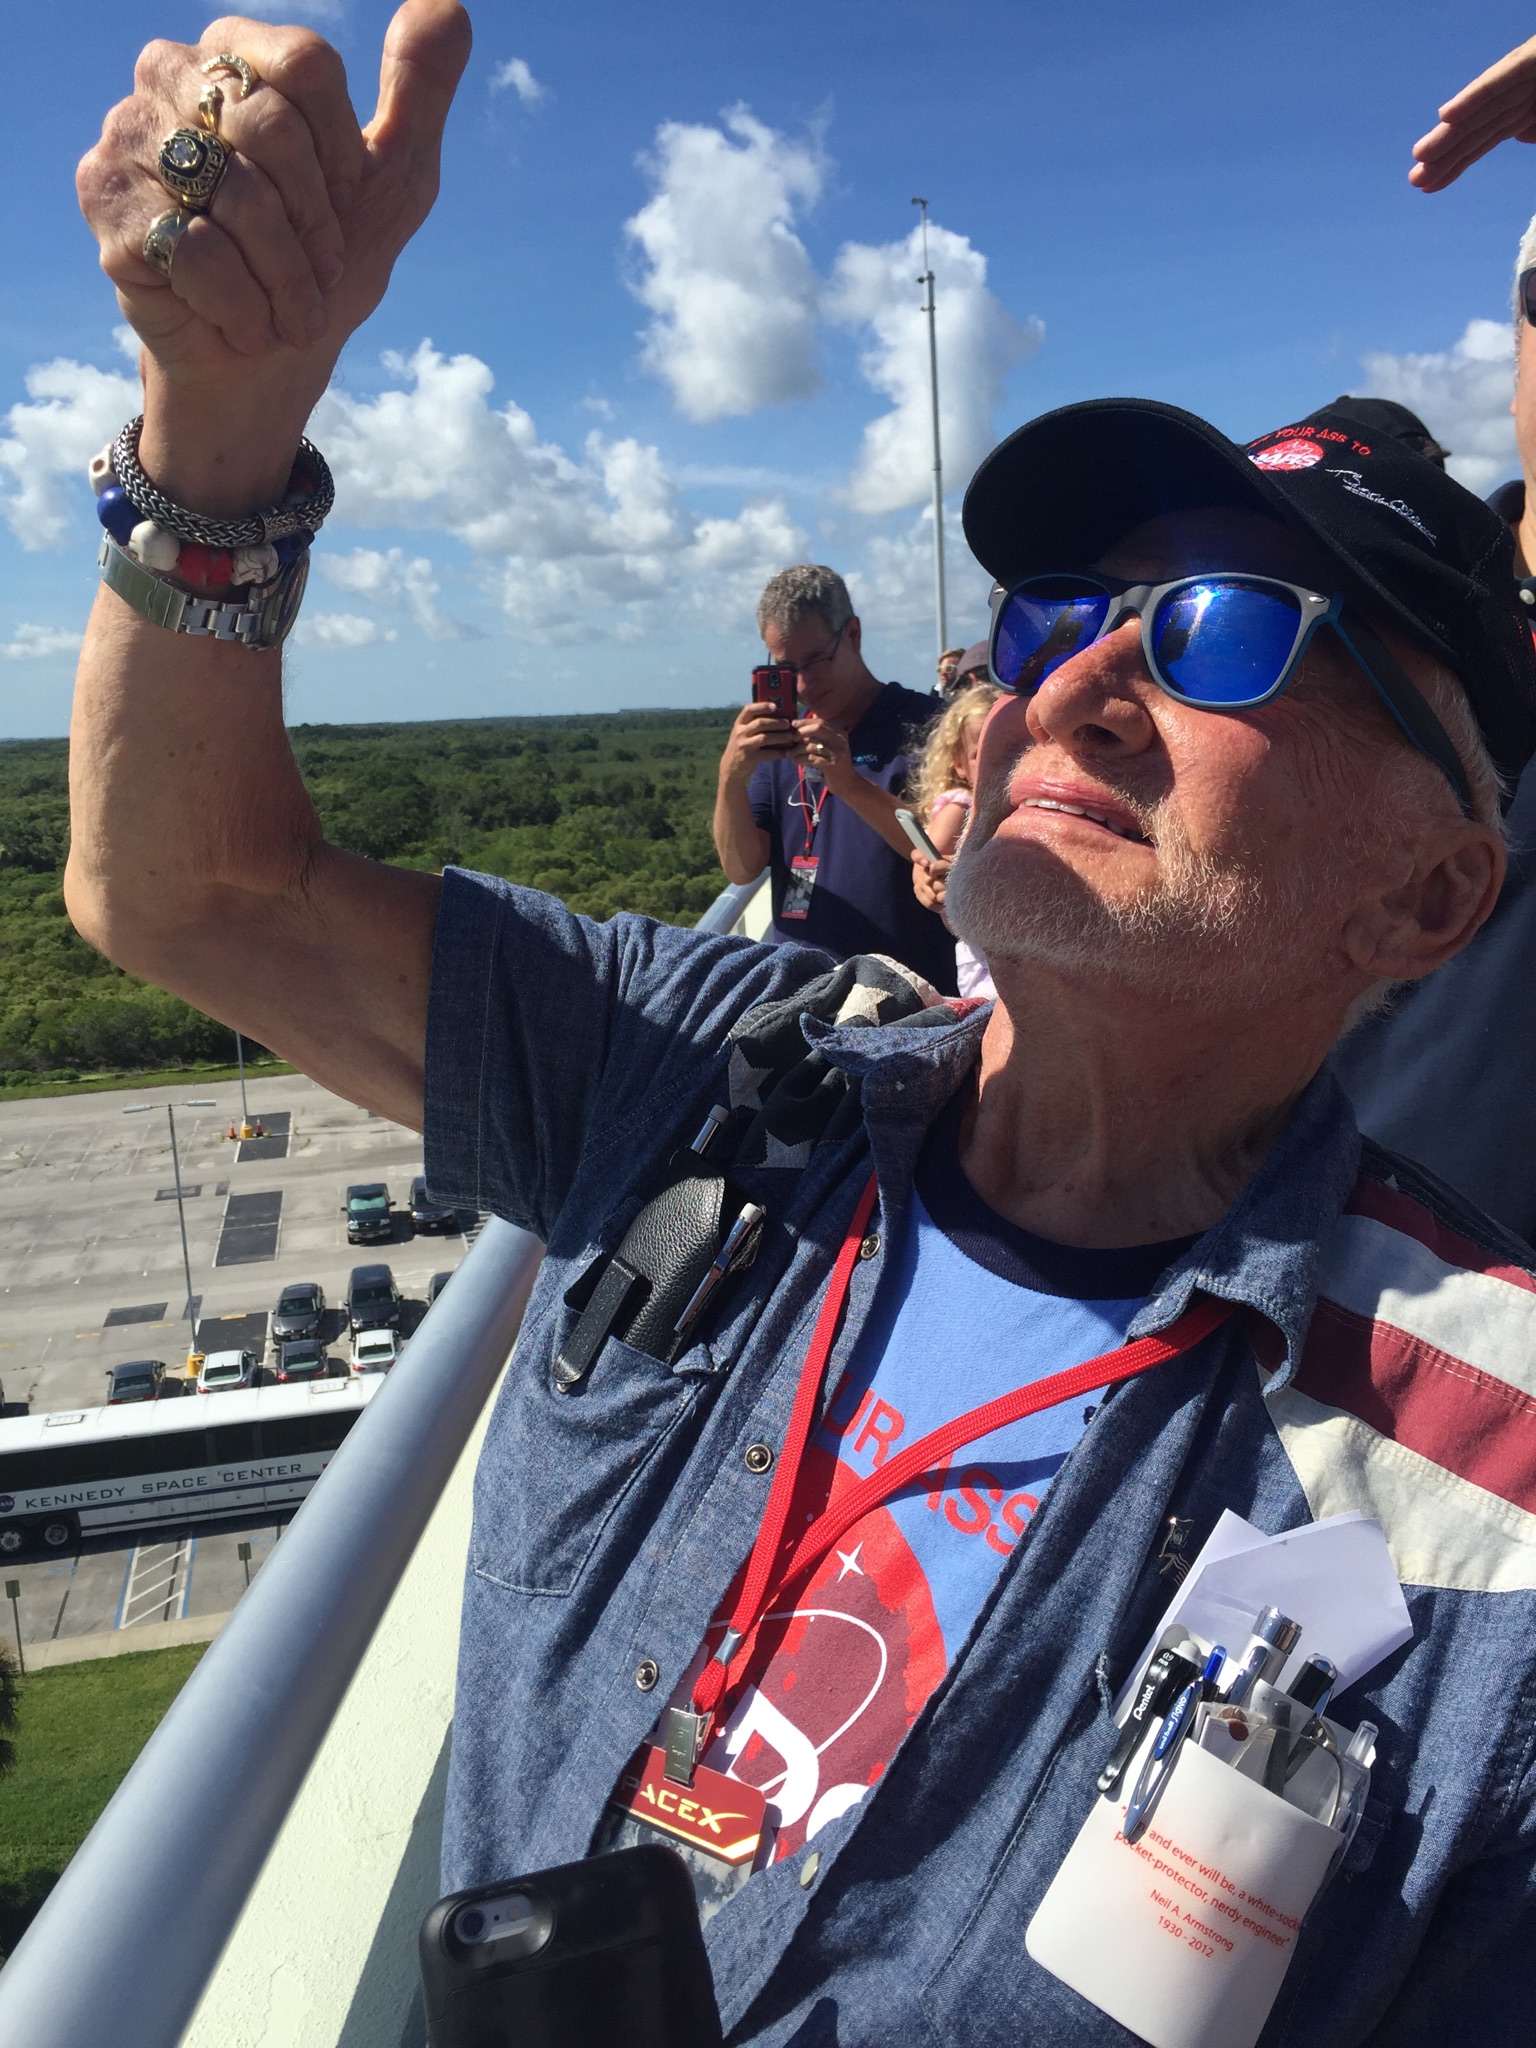 Dr. Buzz Aldrin watches the Spacex Falcon 9 rocket launch on June 28, 2015  at the Kennedy Space Center in Florida.